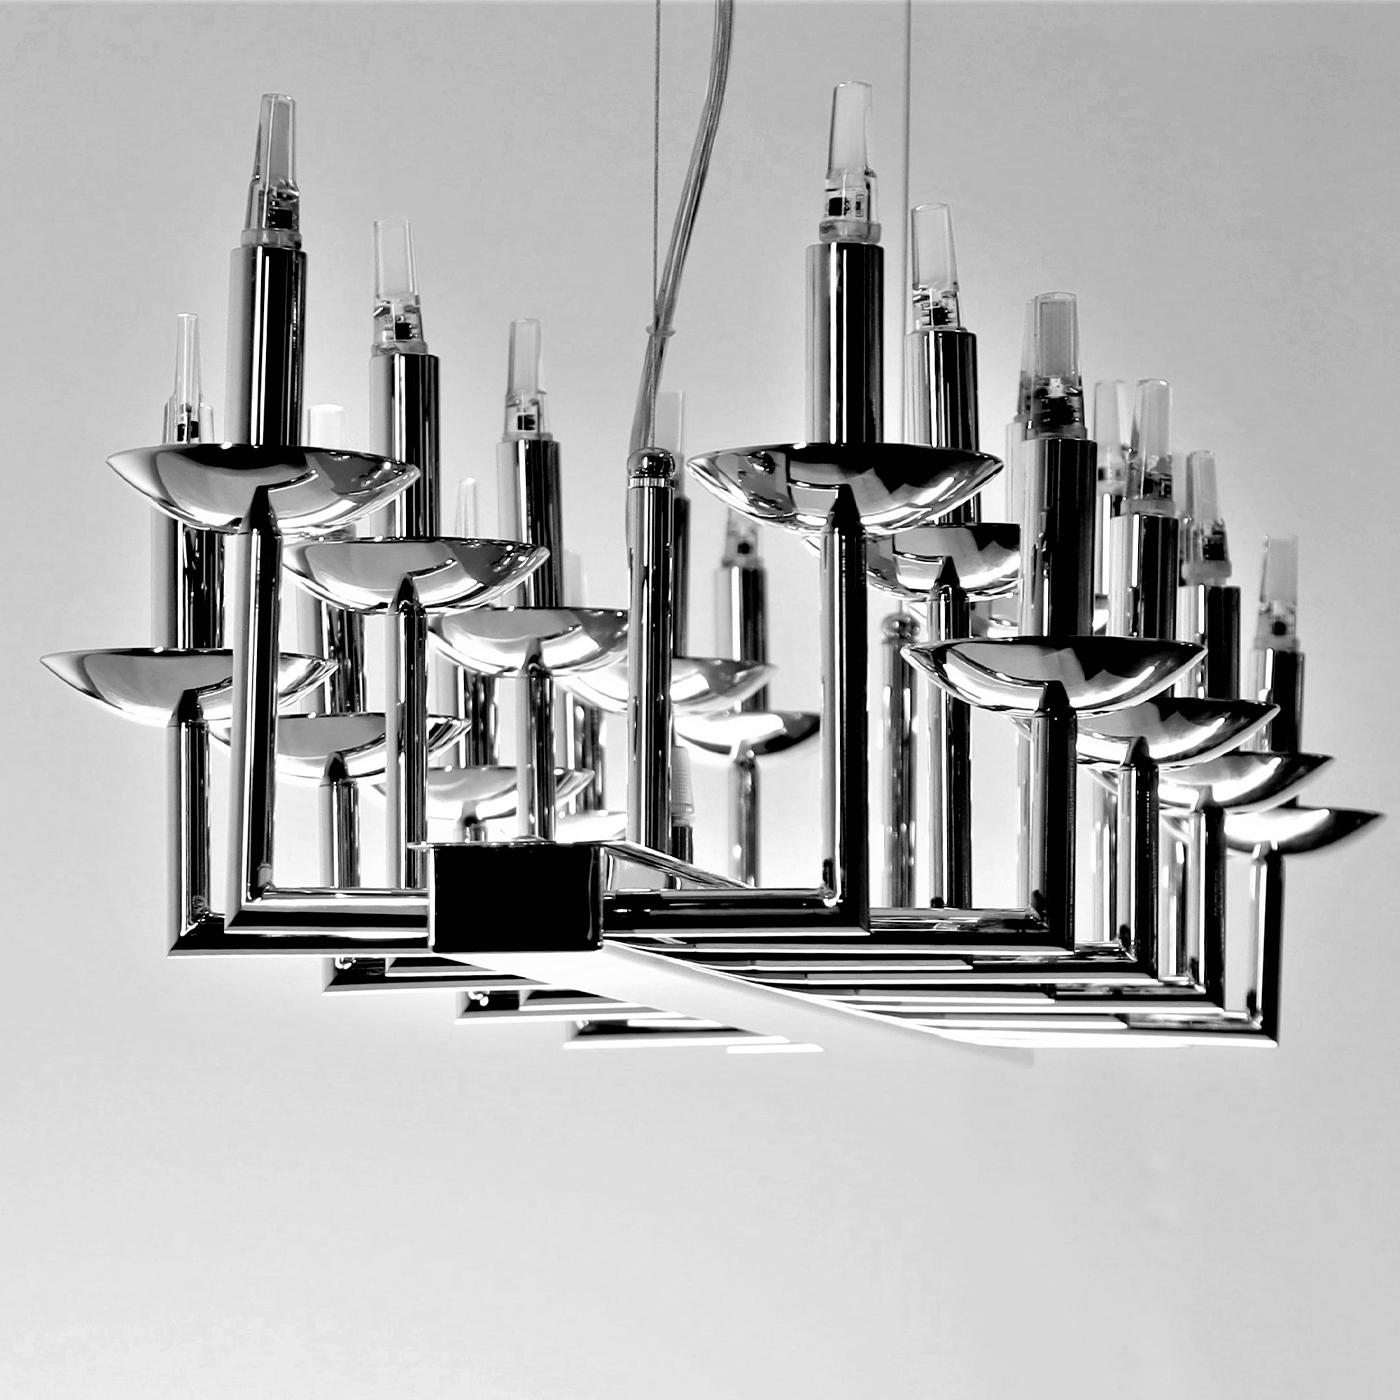 The 2021 new version of the modern chandelier METROPOLITAN by Luigi Aiardo features small L-shaped arms with a sleek and minimal design attached to rectangular modules. METROPOLITAN is one of the Italian brand Aiardini's bestsellers for luxury